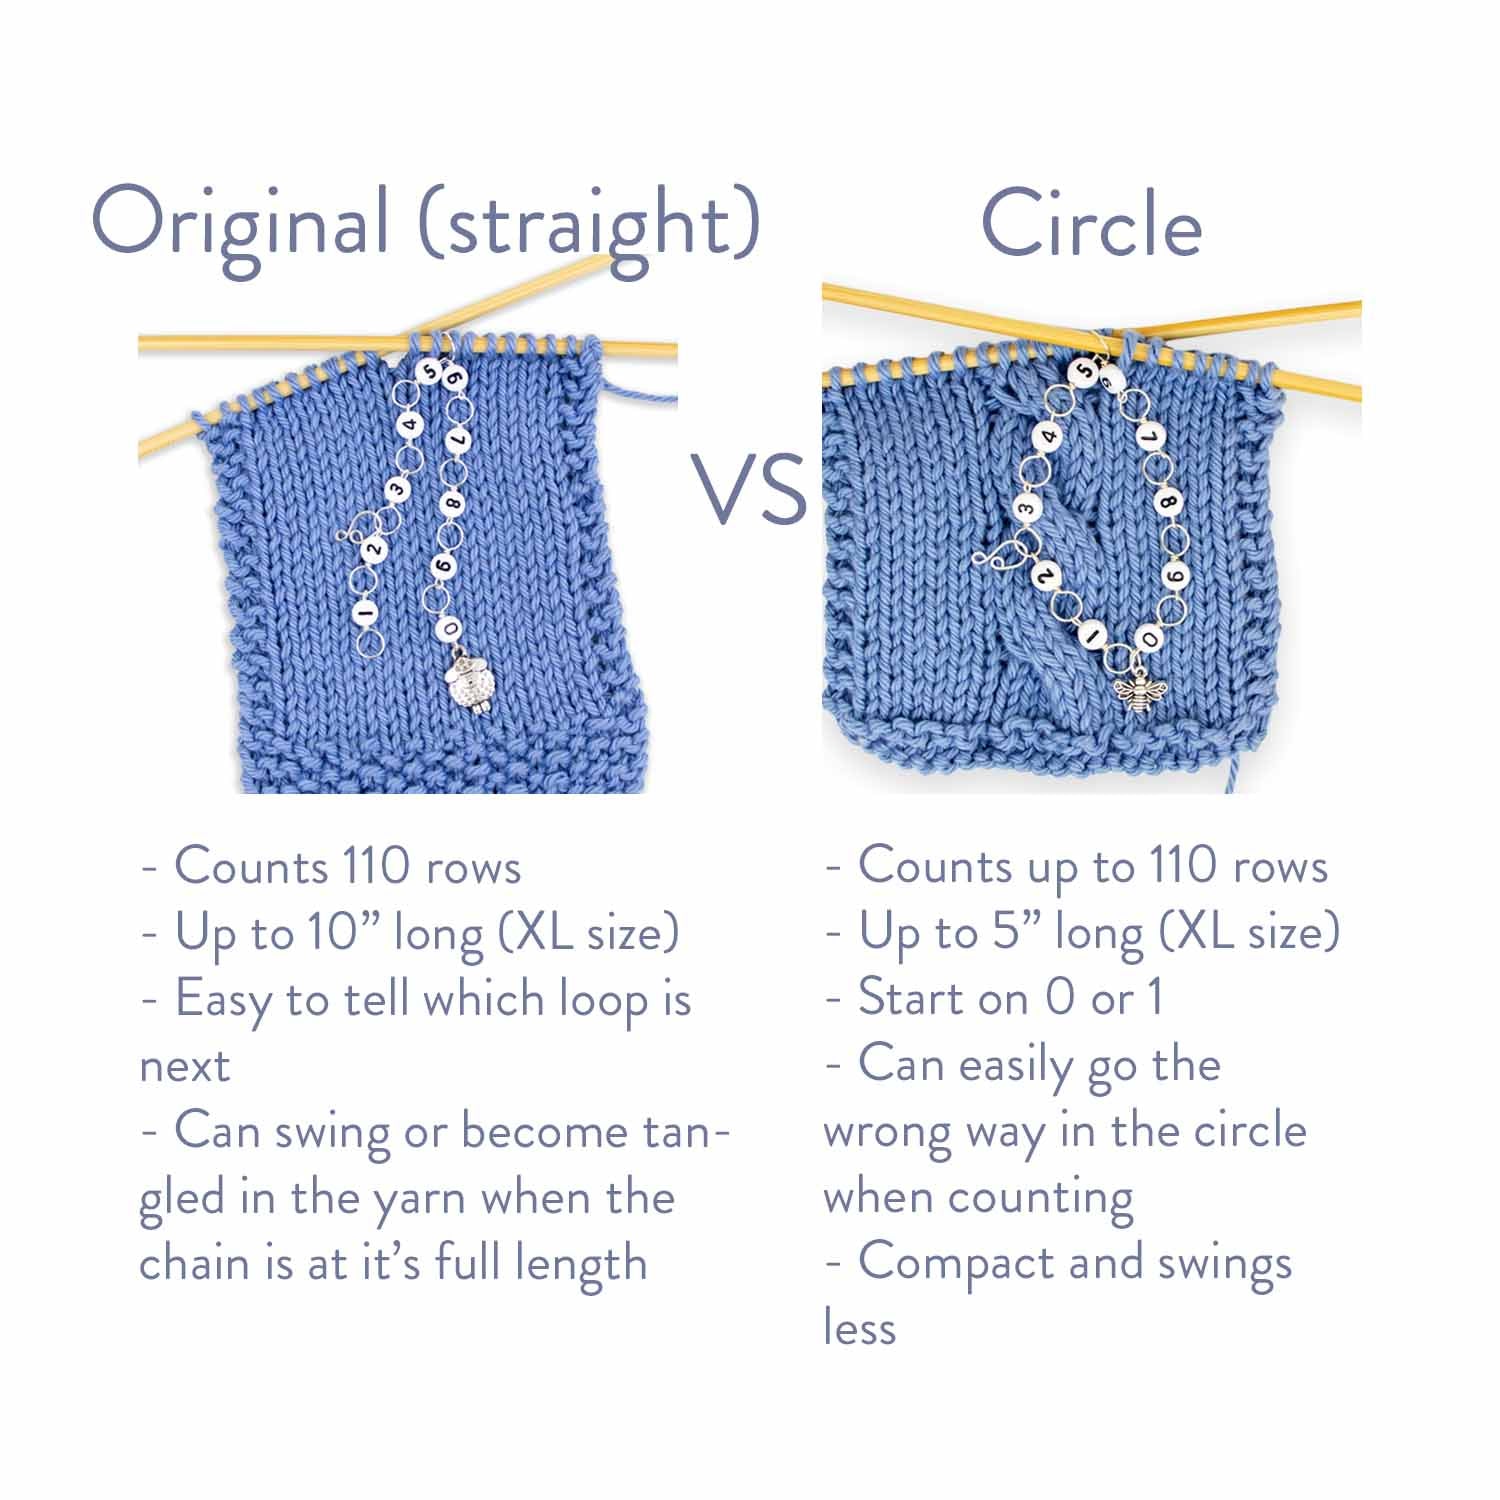 I got this row-counter in my beginner crochet kit. It does not